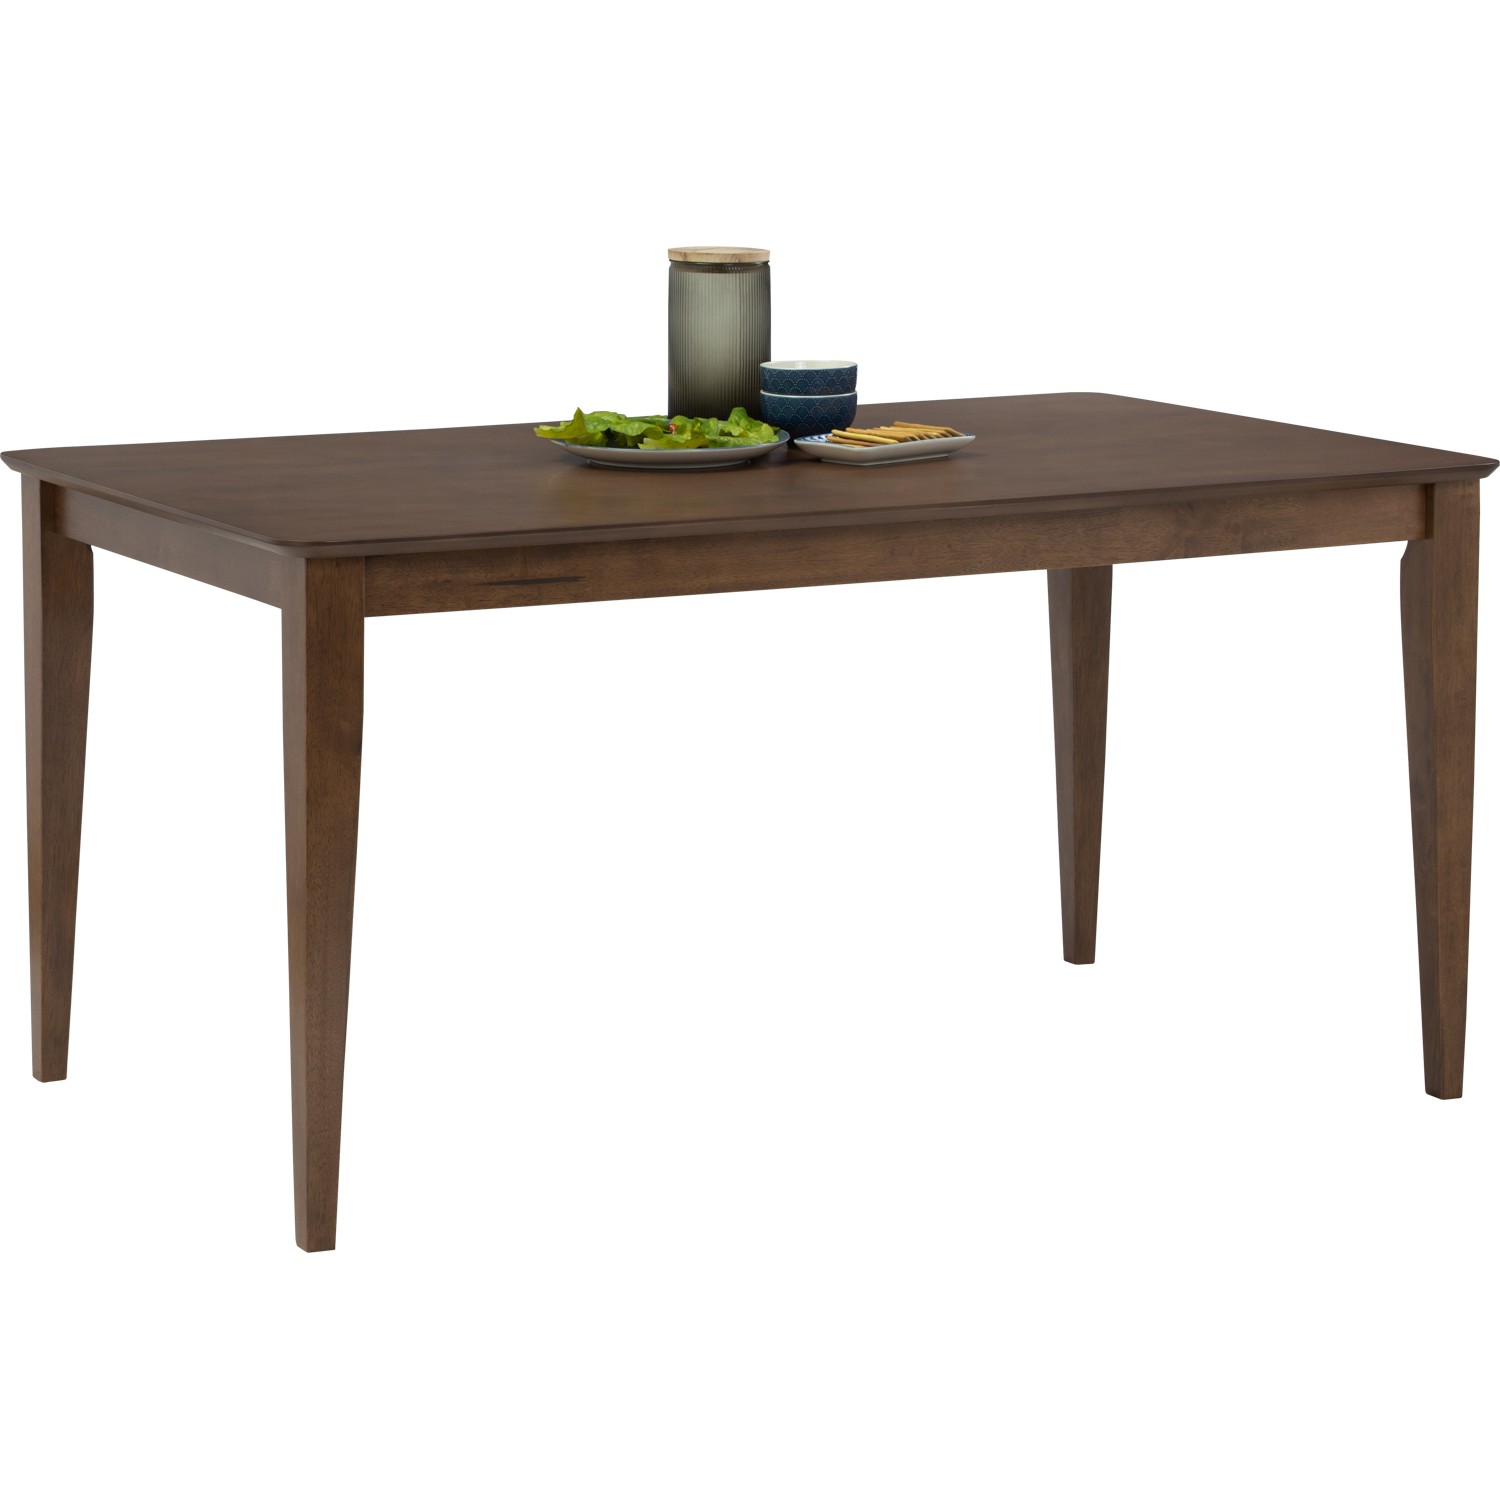 ALLEGRO 900X1500 DINING TABLE 109